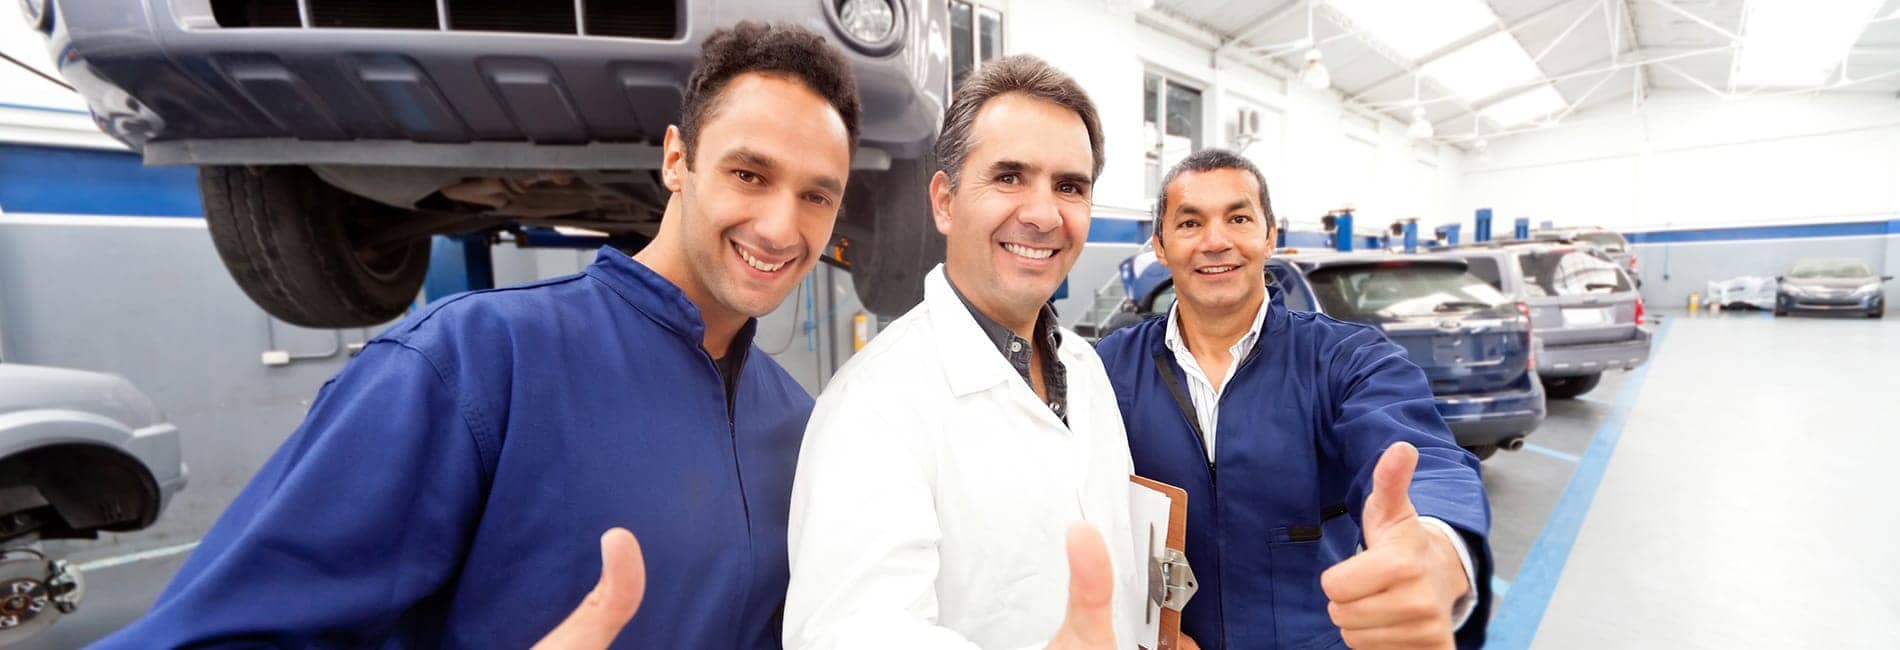 three service technicians giving a thumbs up in body shop